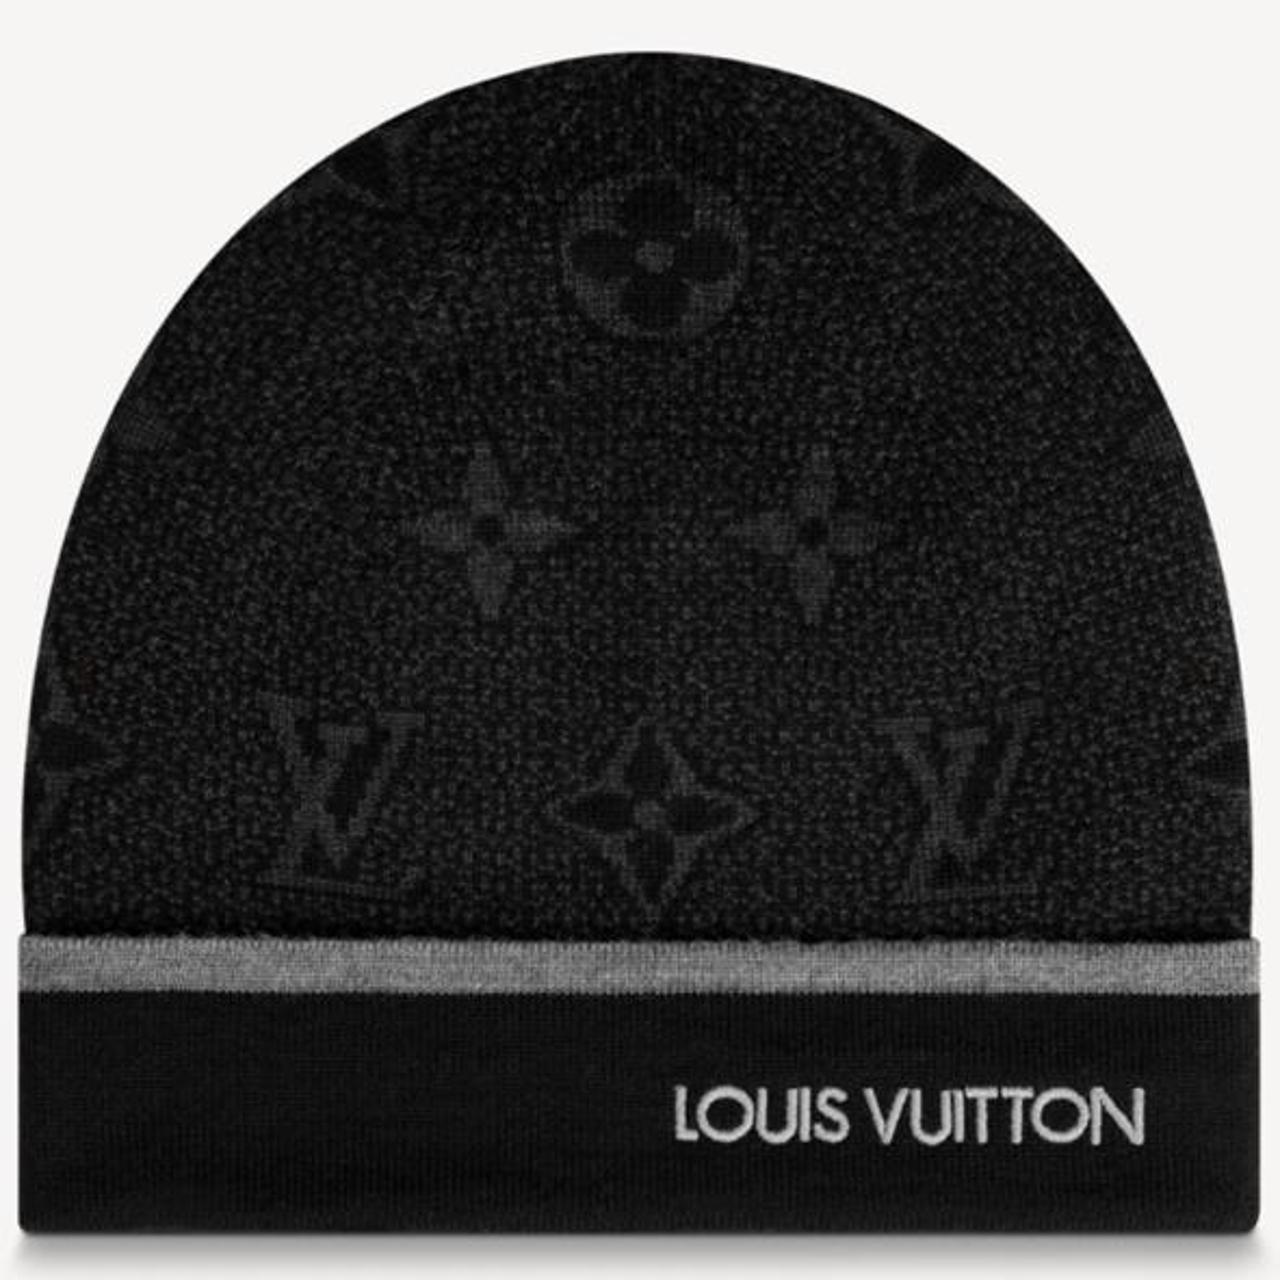 Mens Louis Vuitton hat , new with tags - Depop